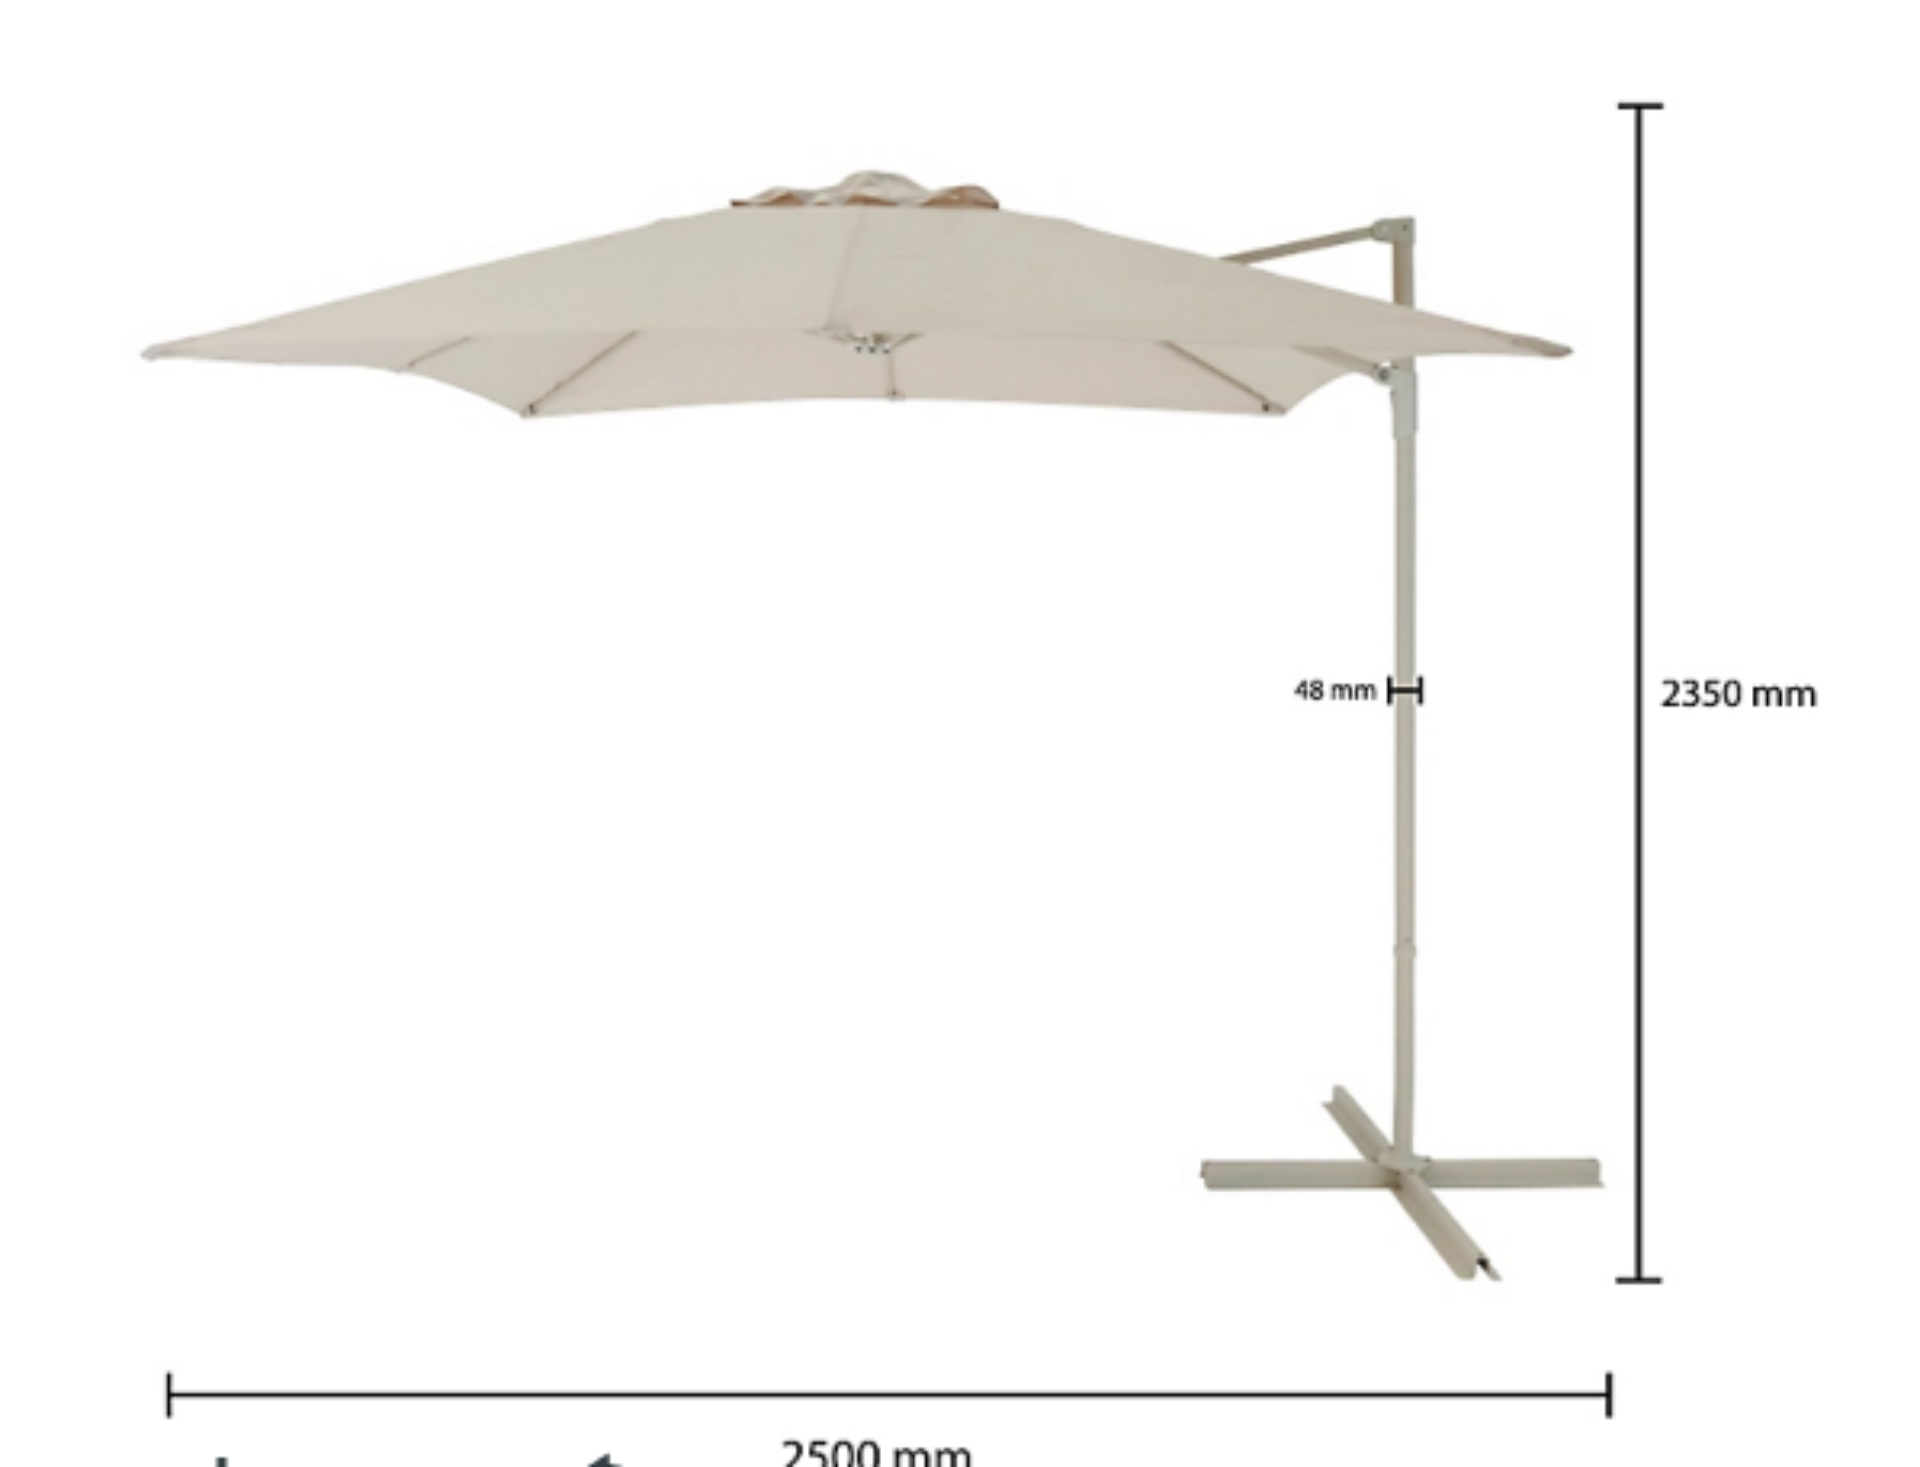 New & Boxed Luxury 2.5m Sand Overhanging Parasol- Sand. This square overhanging parasol provides - Image 6 of 6